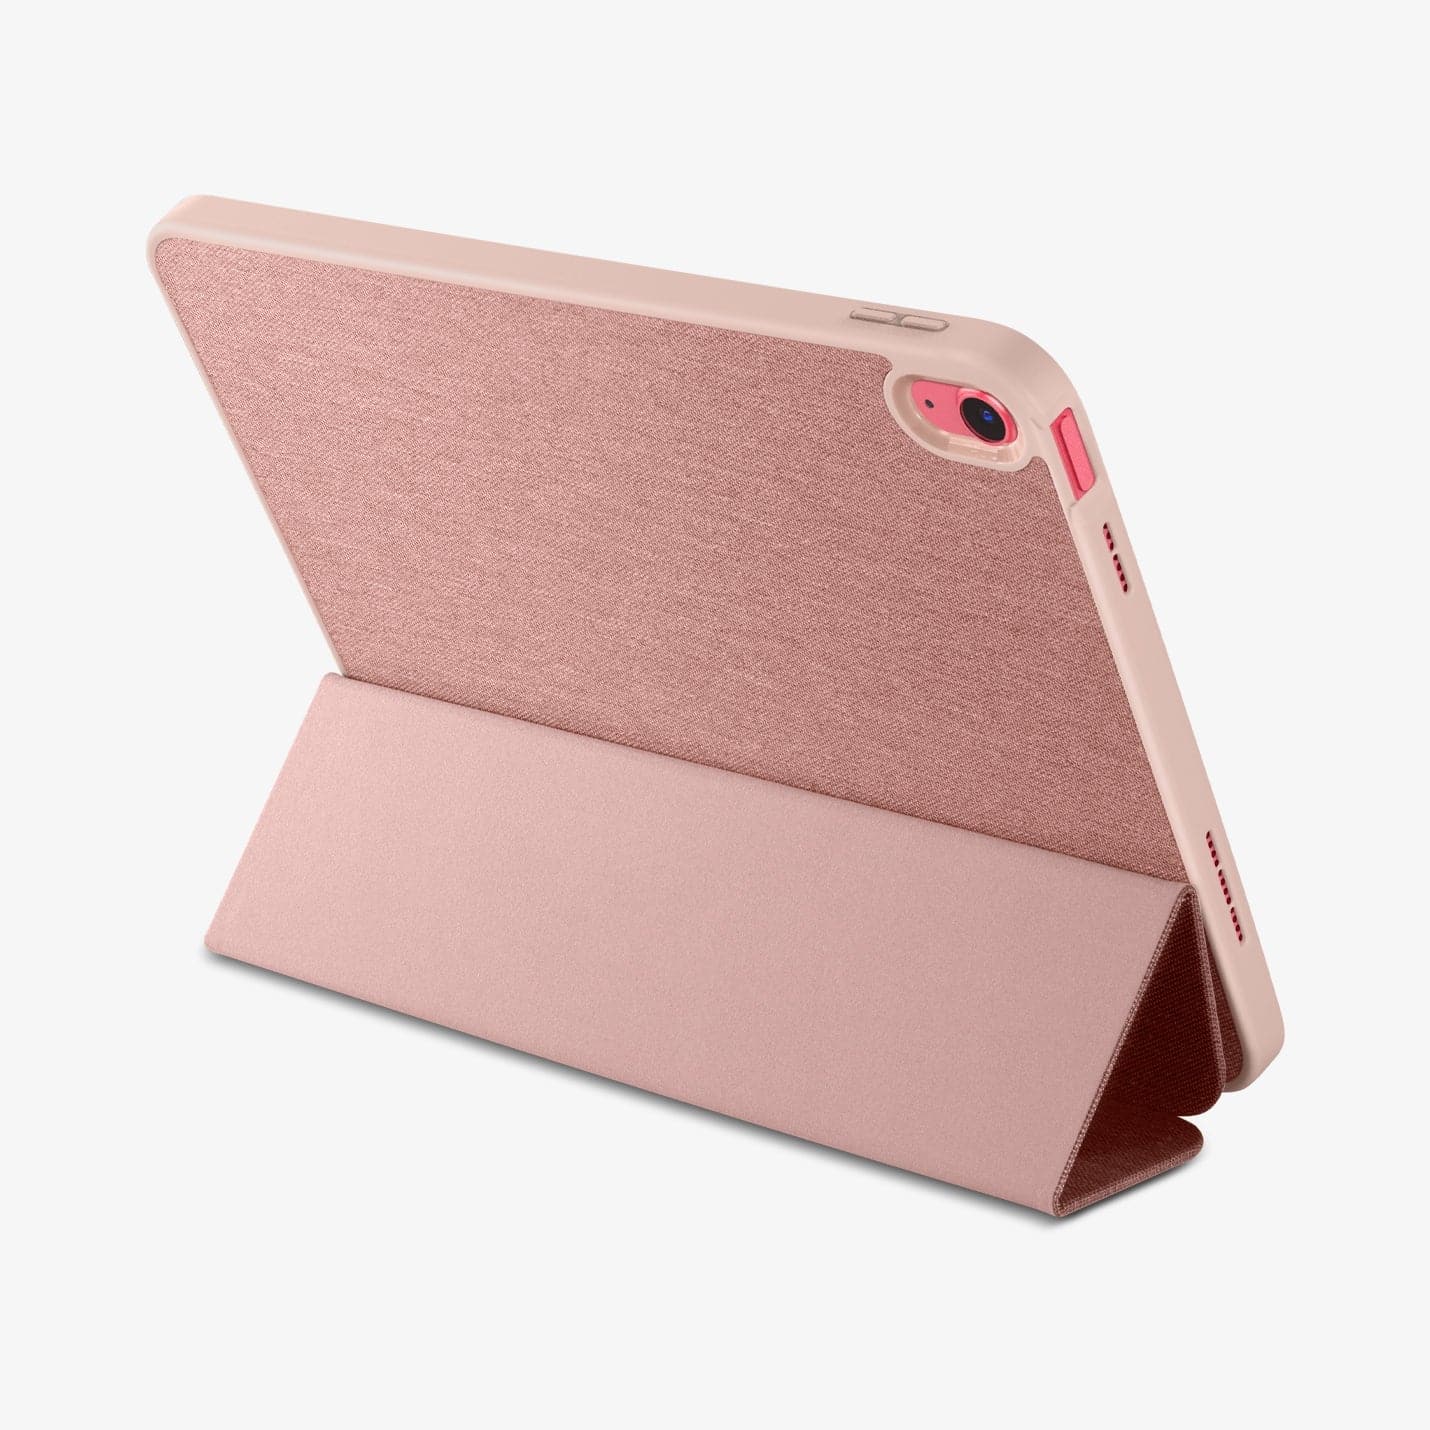 ACS05307 - iPad 10.9" Case Urban Fit in rose gold showing the back with device propped up by built in kickstand